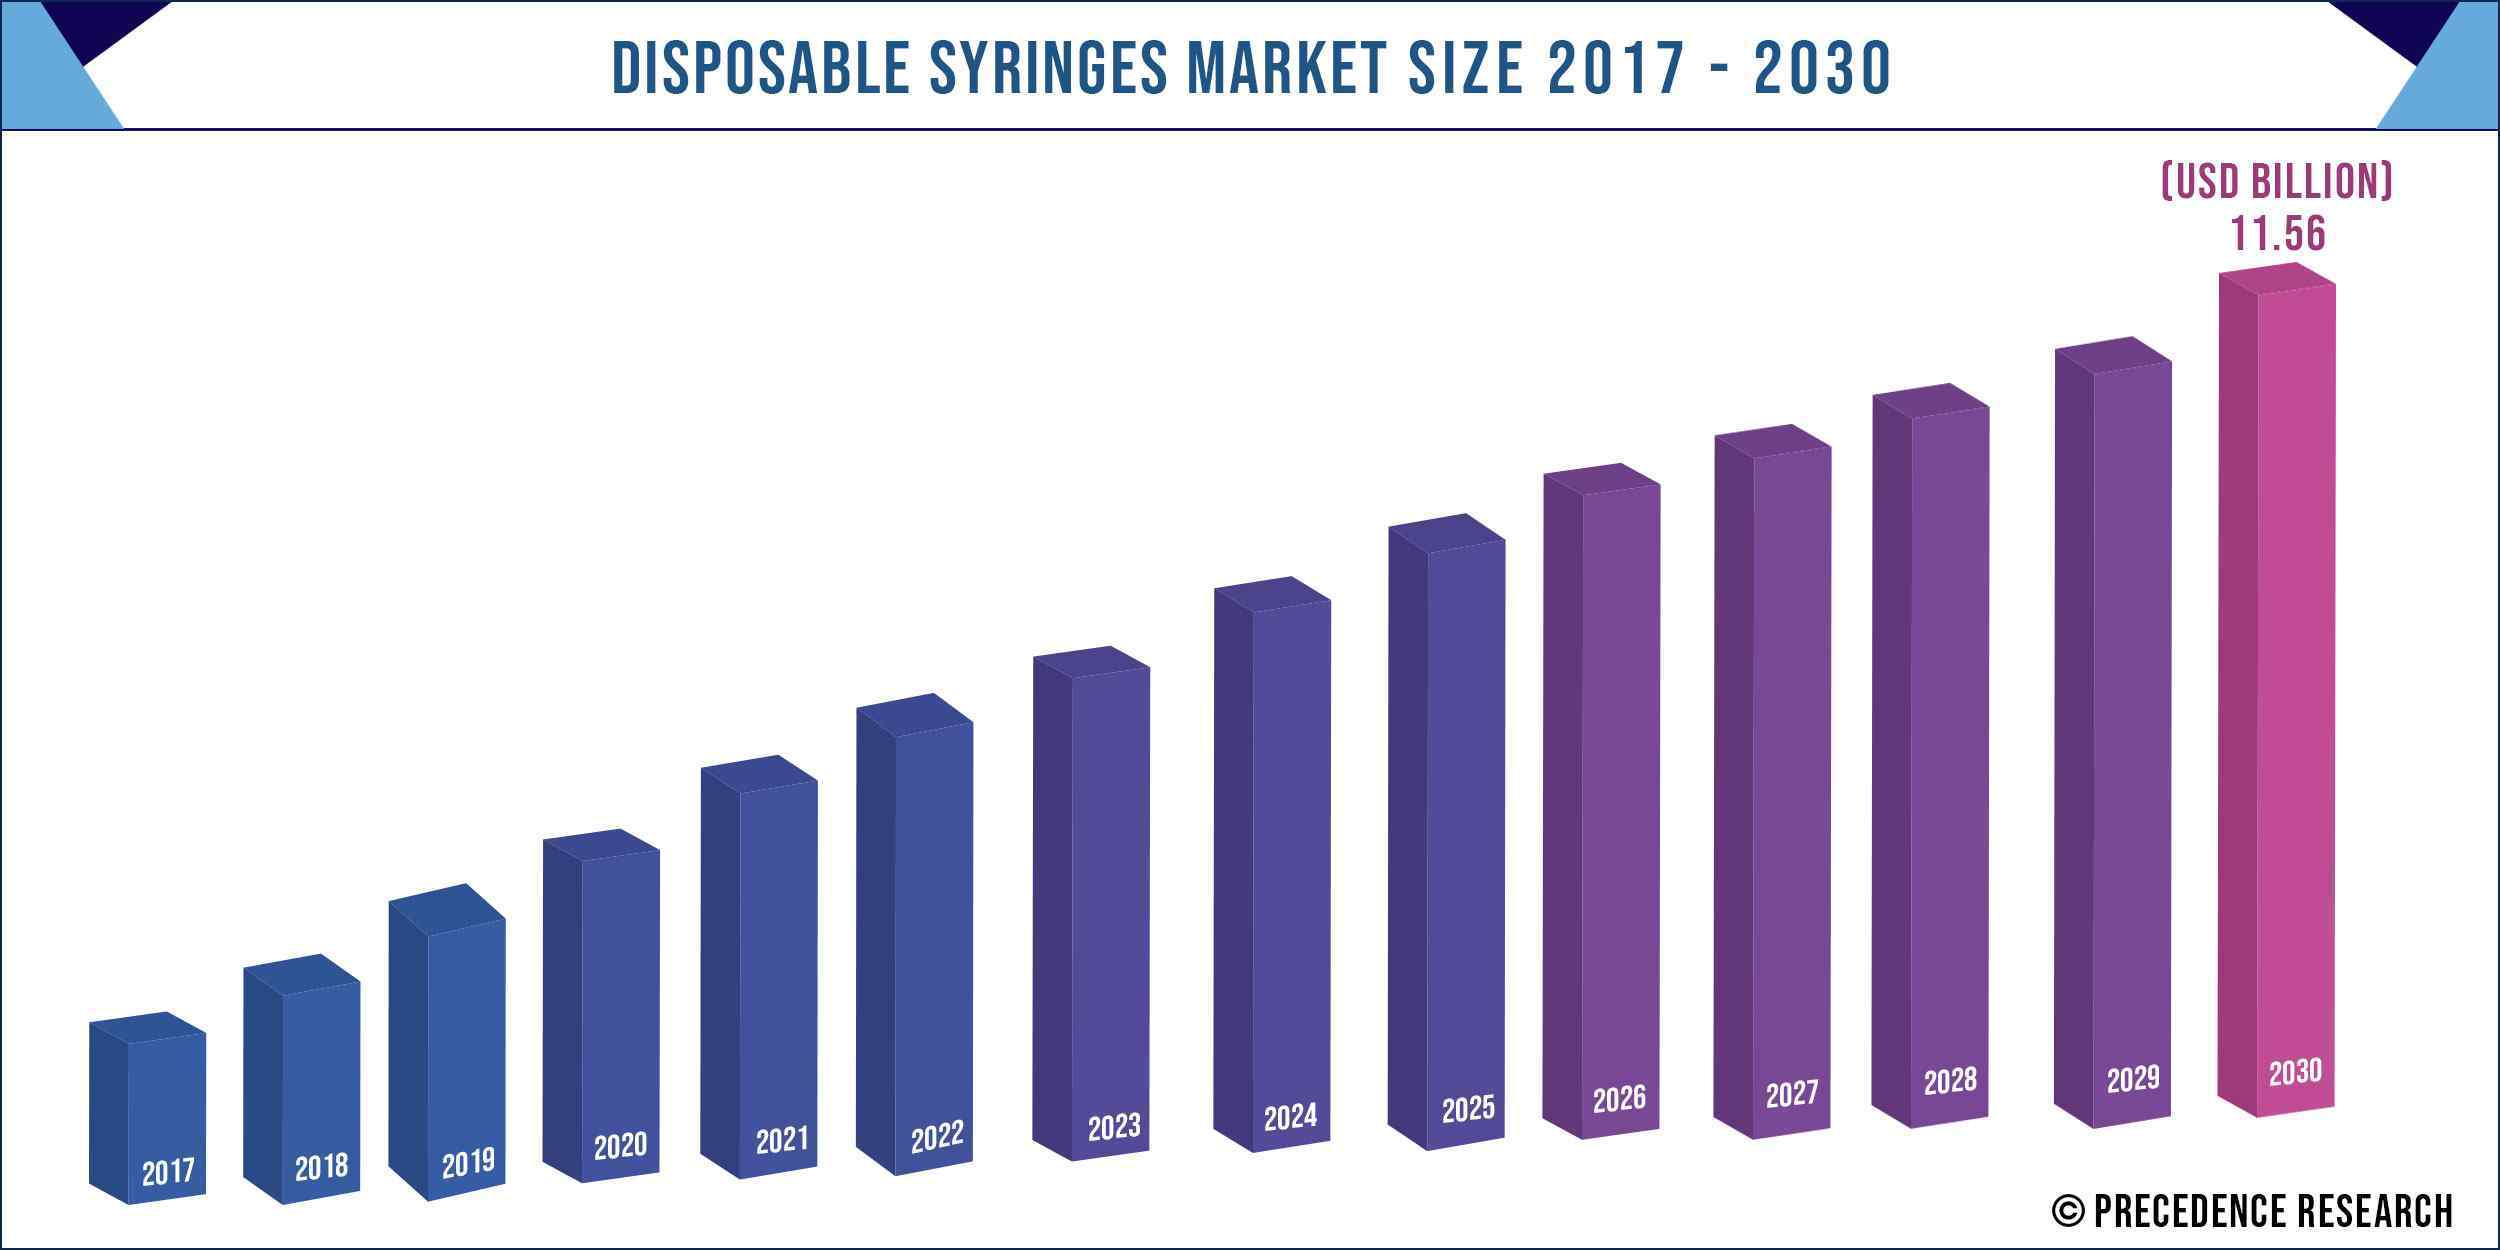 Disposable Syringes Market Size 2017 to 2030